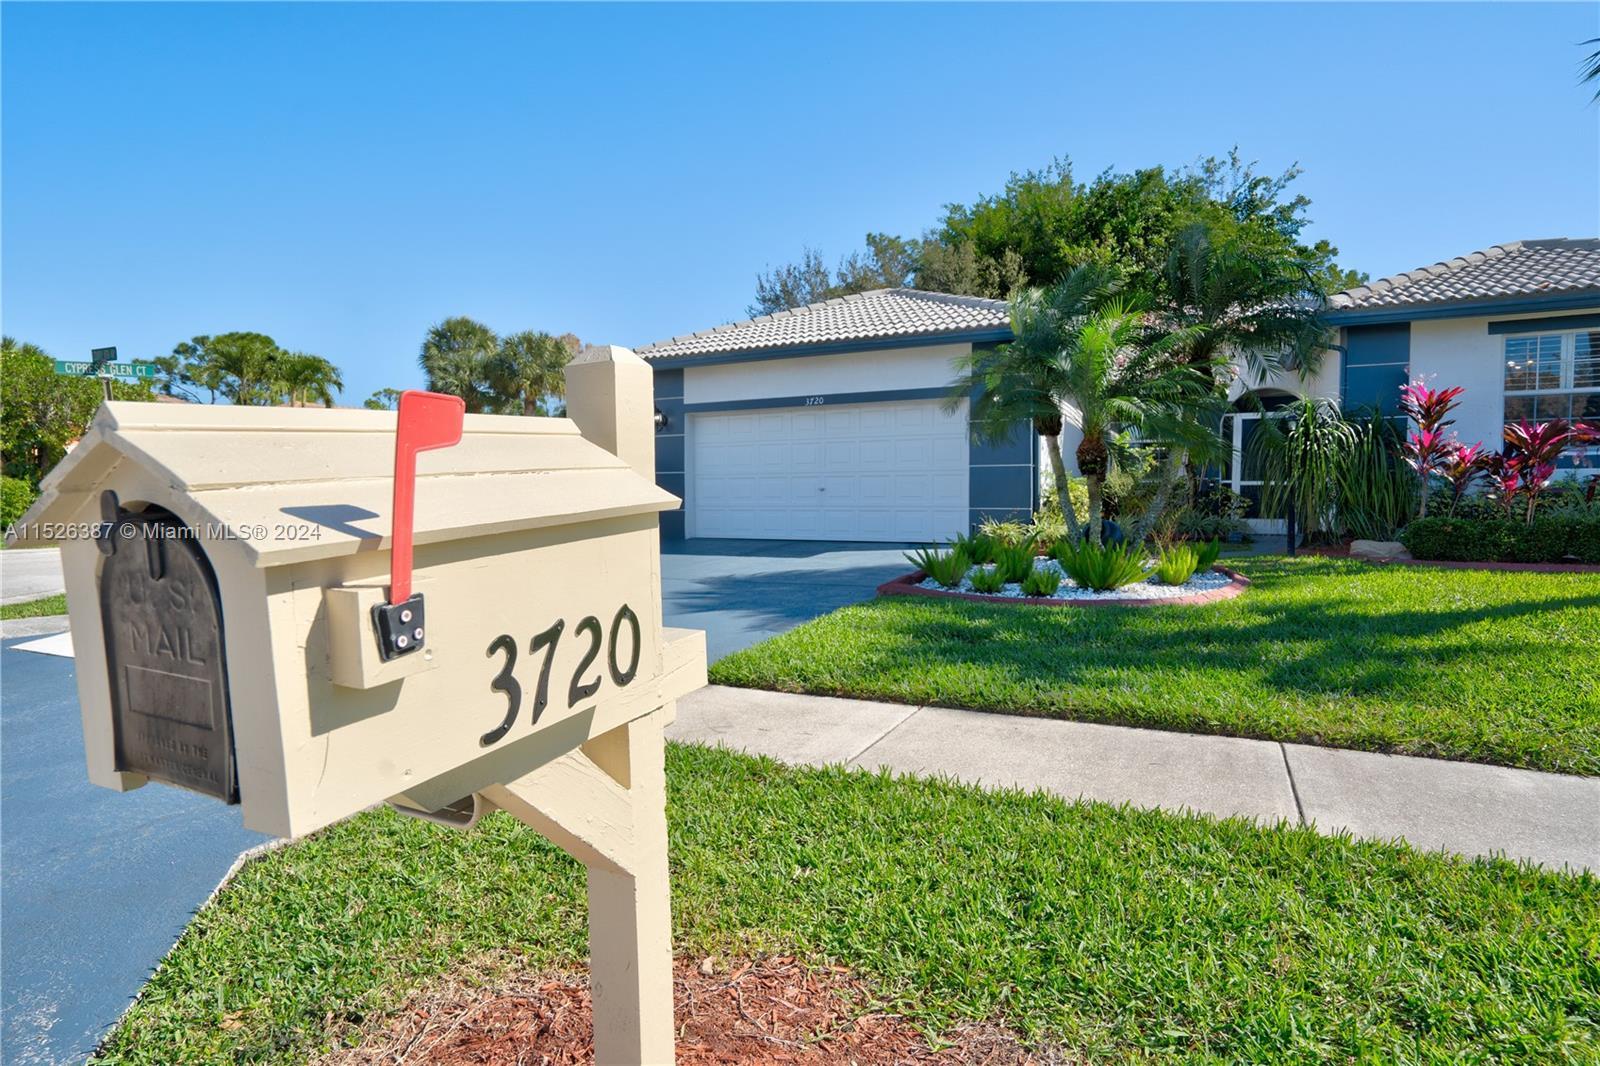 Photo of 3720 Country Vista Wy in Lake Worth, FL